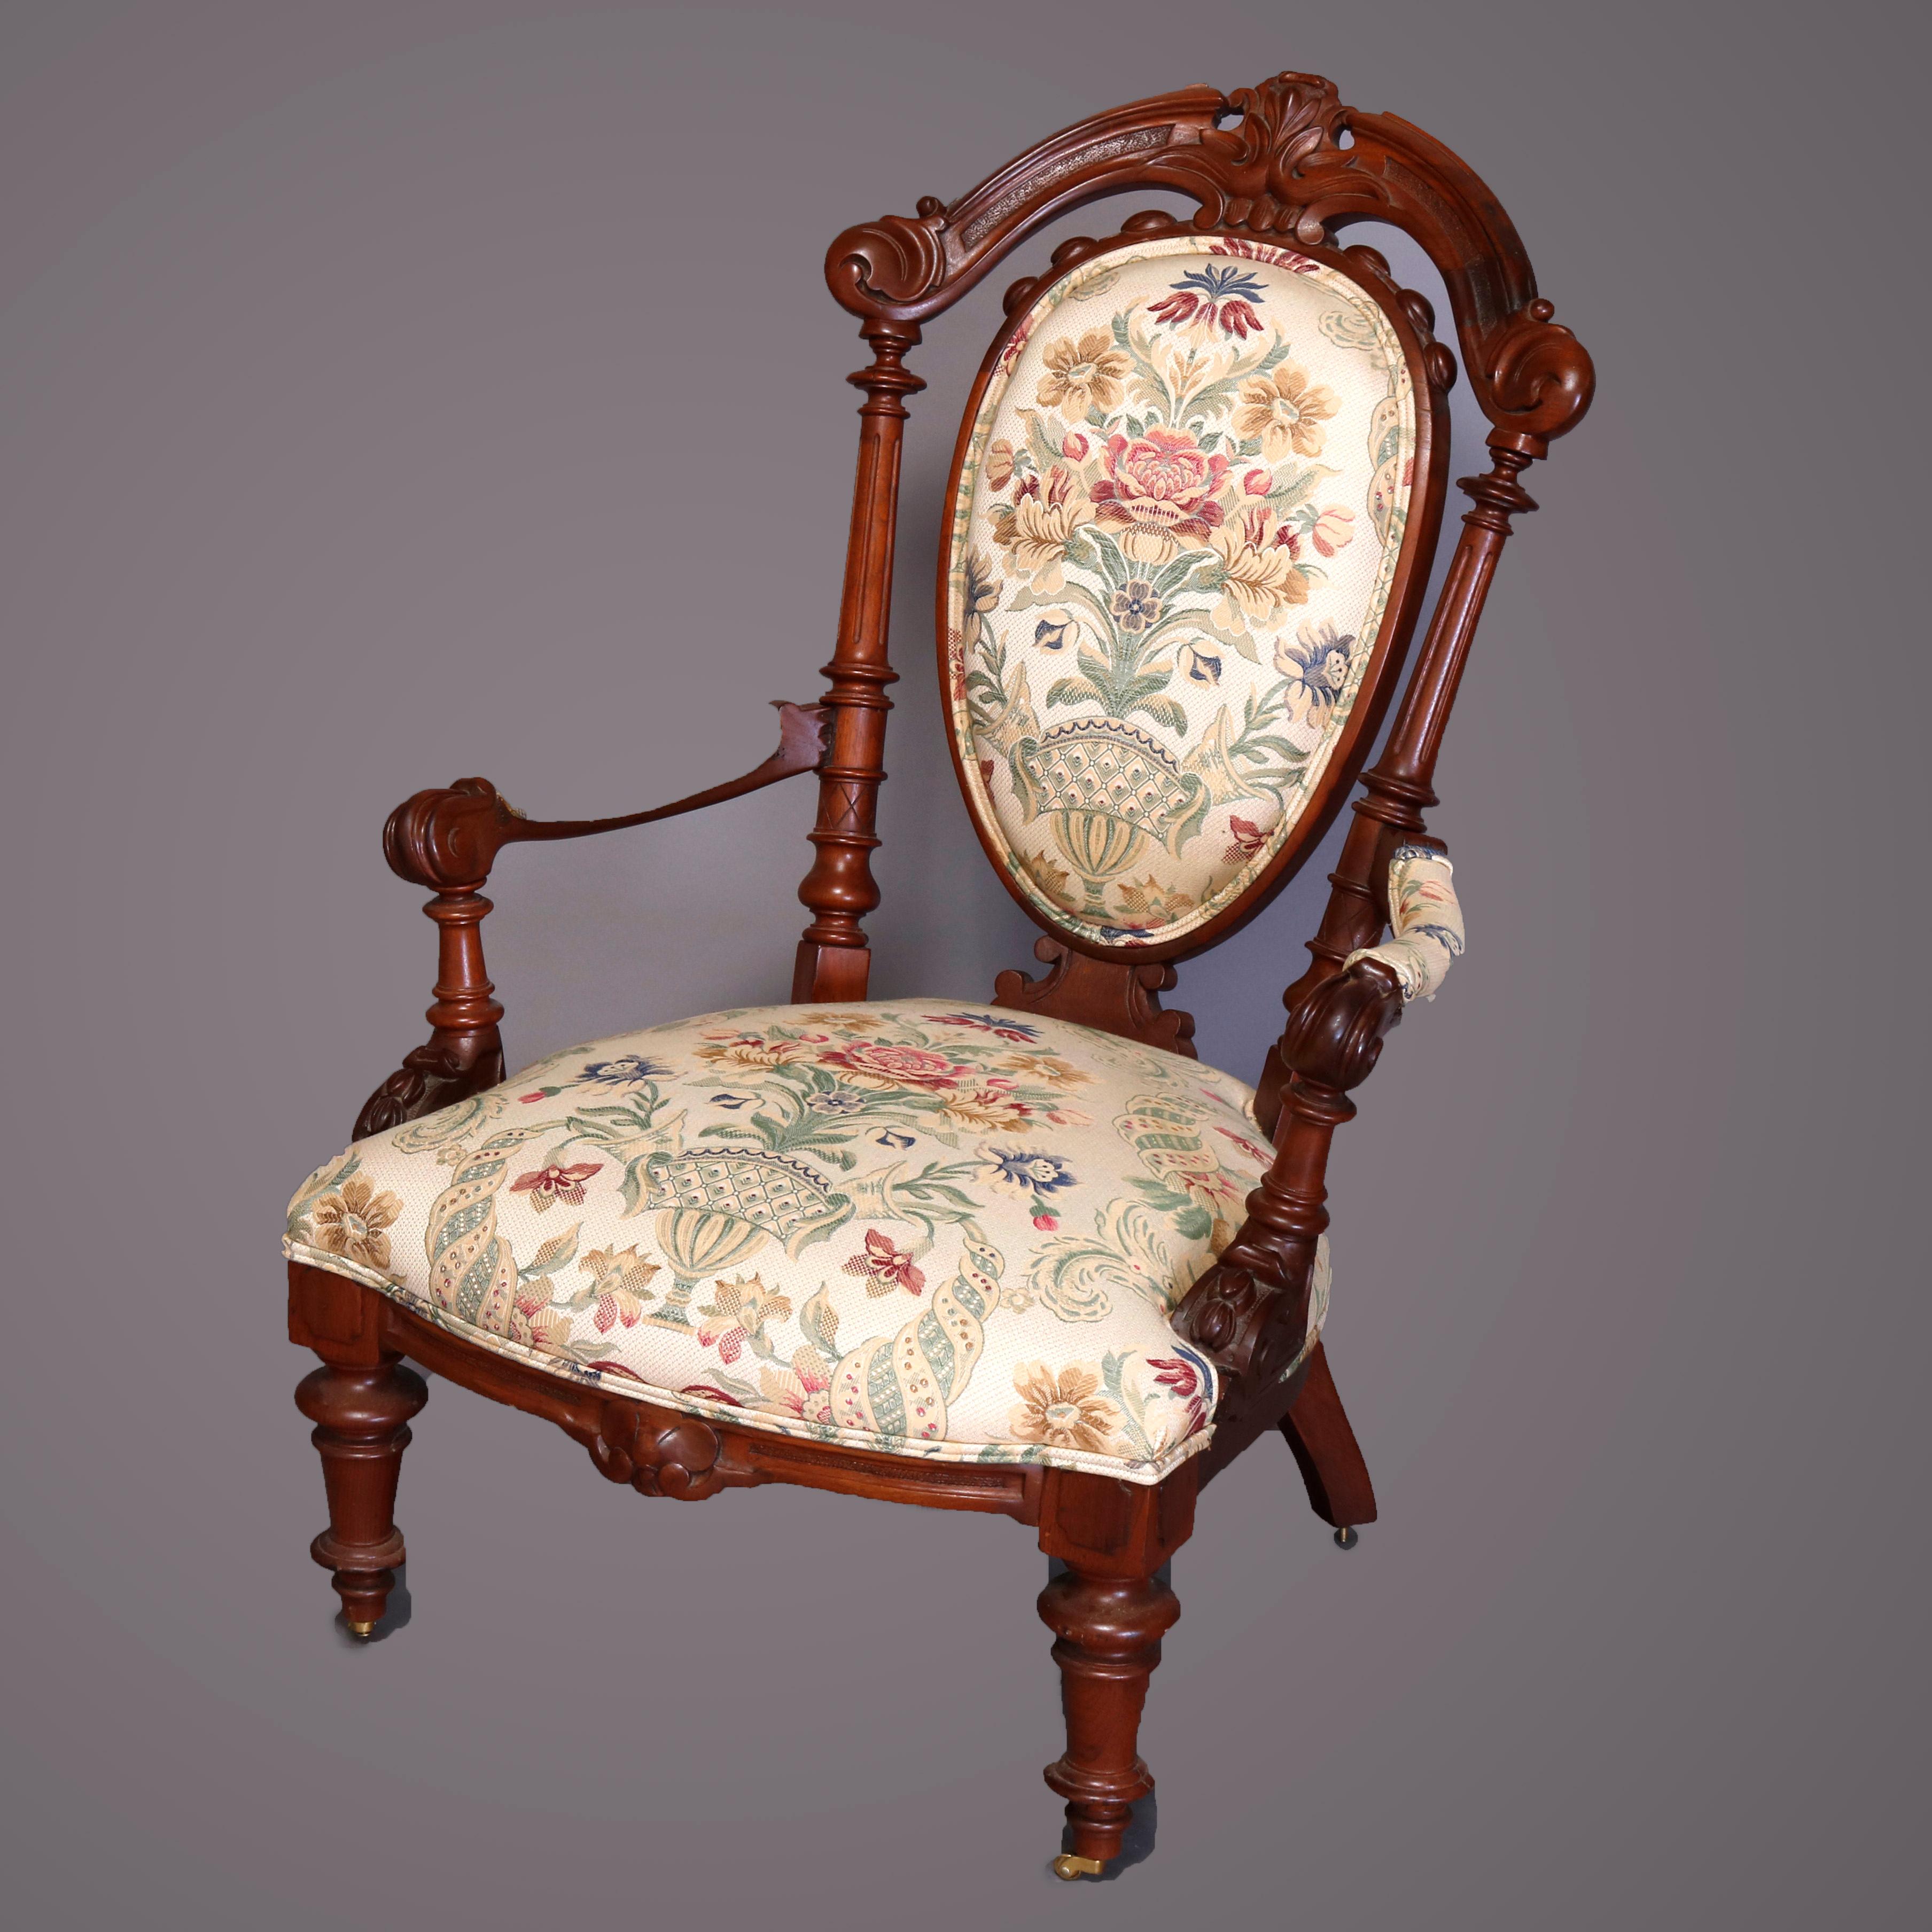 A set of two French Victorian Renaissance Revival parlor chairs offer carved walnut frames with Fluer de Lis crest having flanking scroll and acanthus decorated rail and reeded columns surmounting panier de fleurs upholstered backs and seats raised